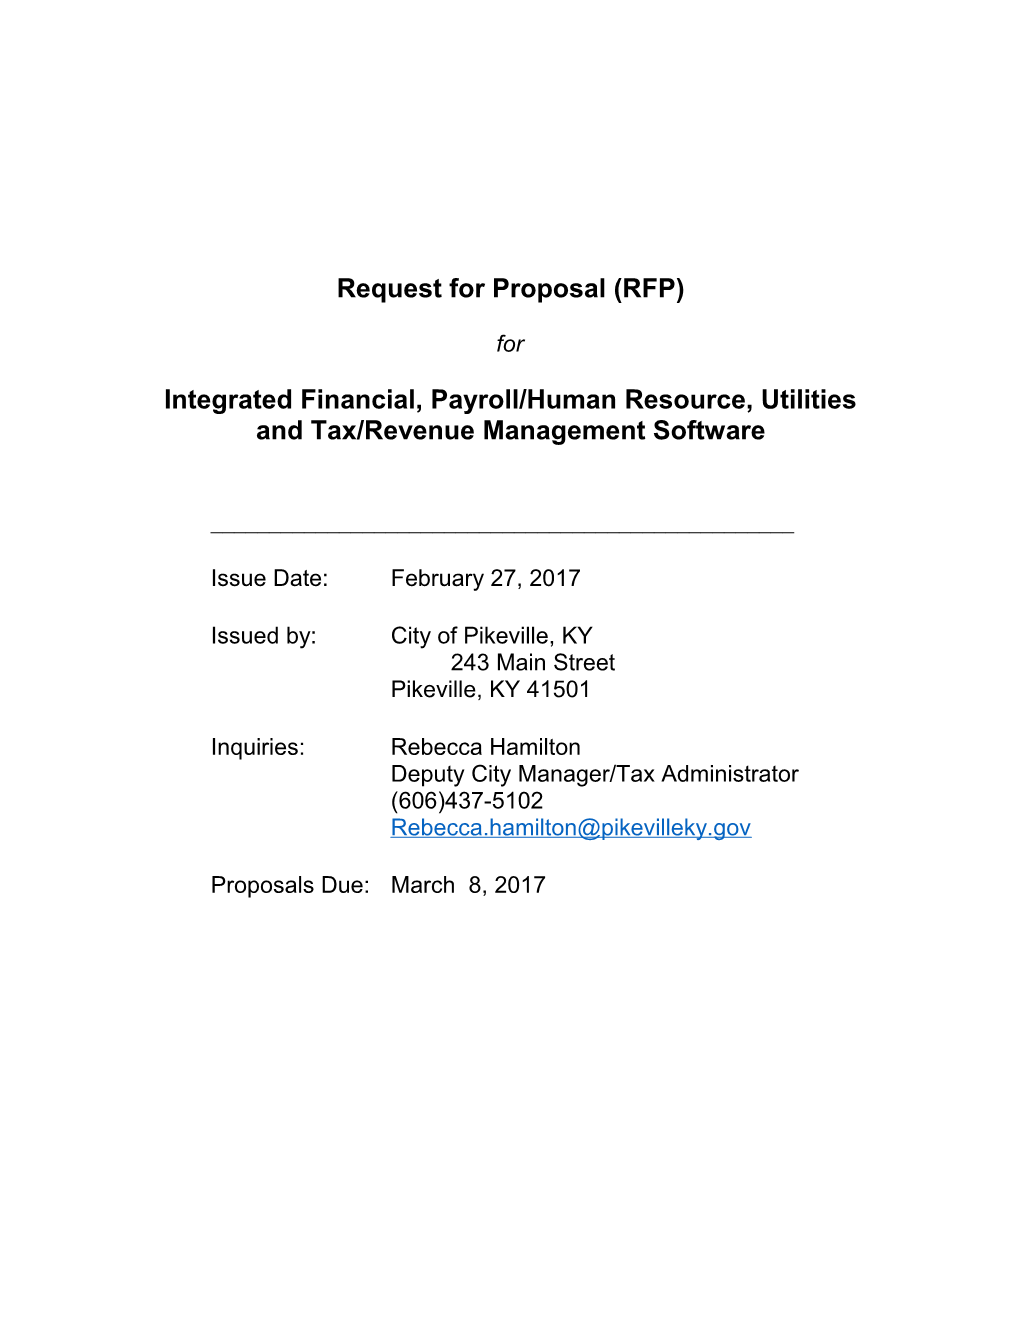 City of Pikeville, KY Request for Proposal (RFP)